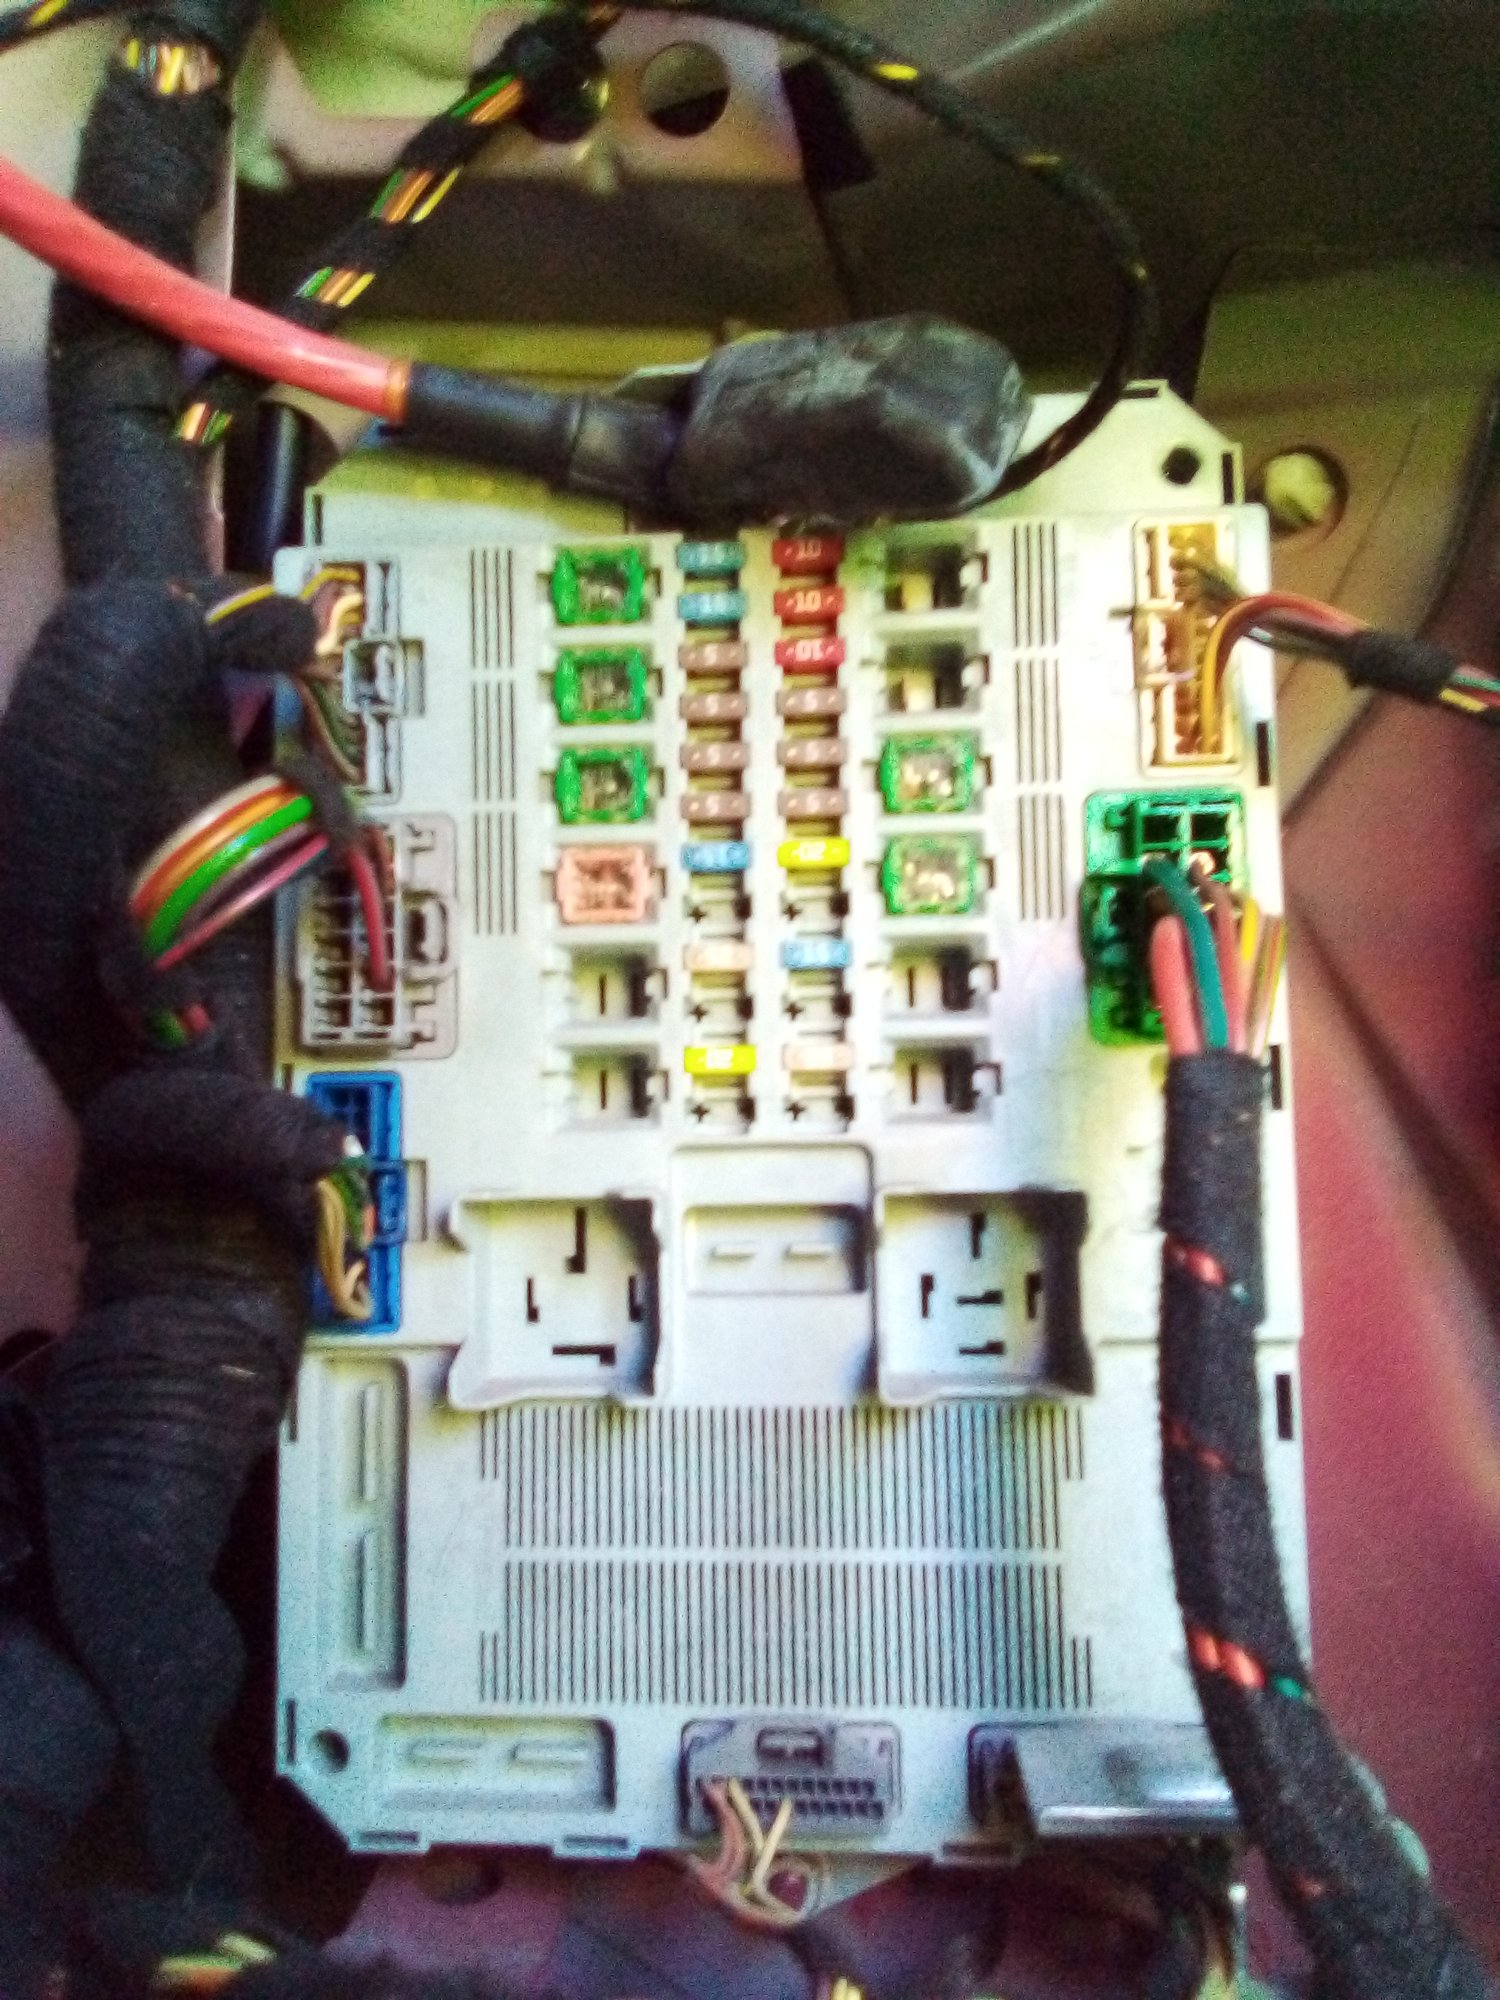 Rear fuse box missing relays. I cannot ...